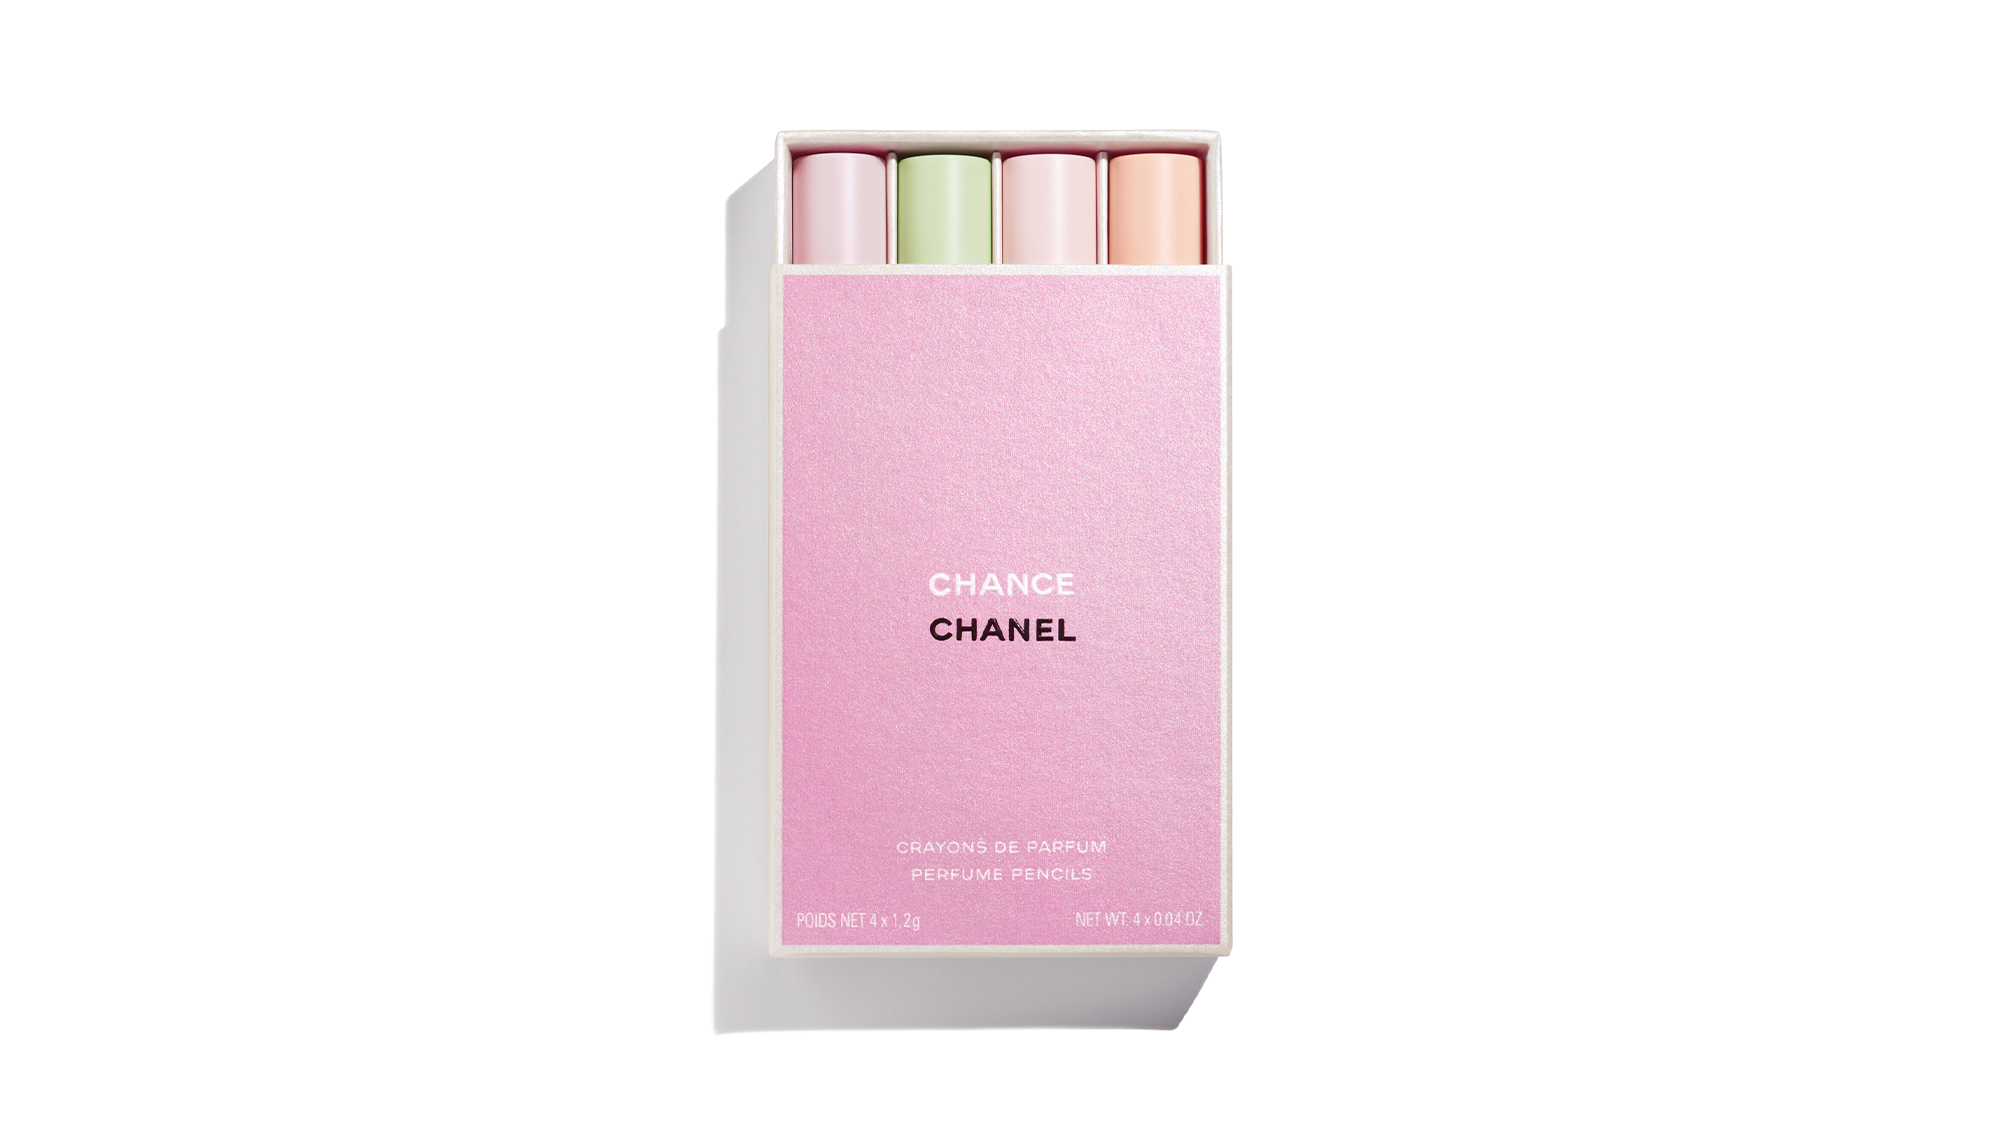 100 % Authentic Limited Edition Chanel Chance Perfume Pencils